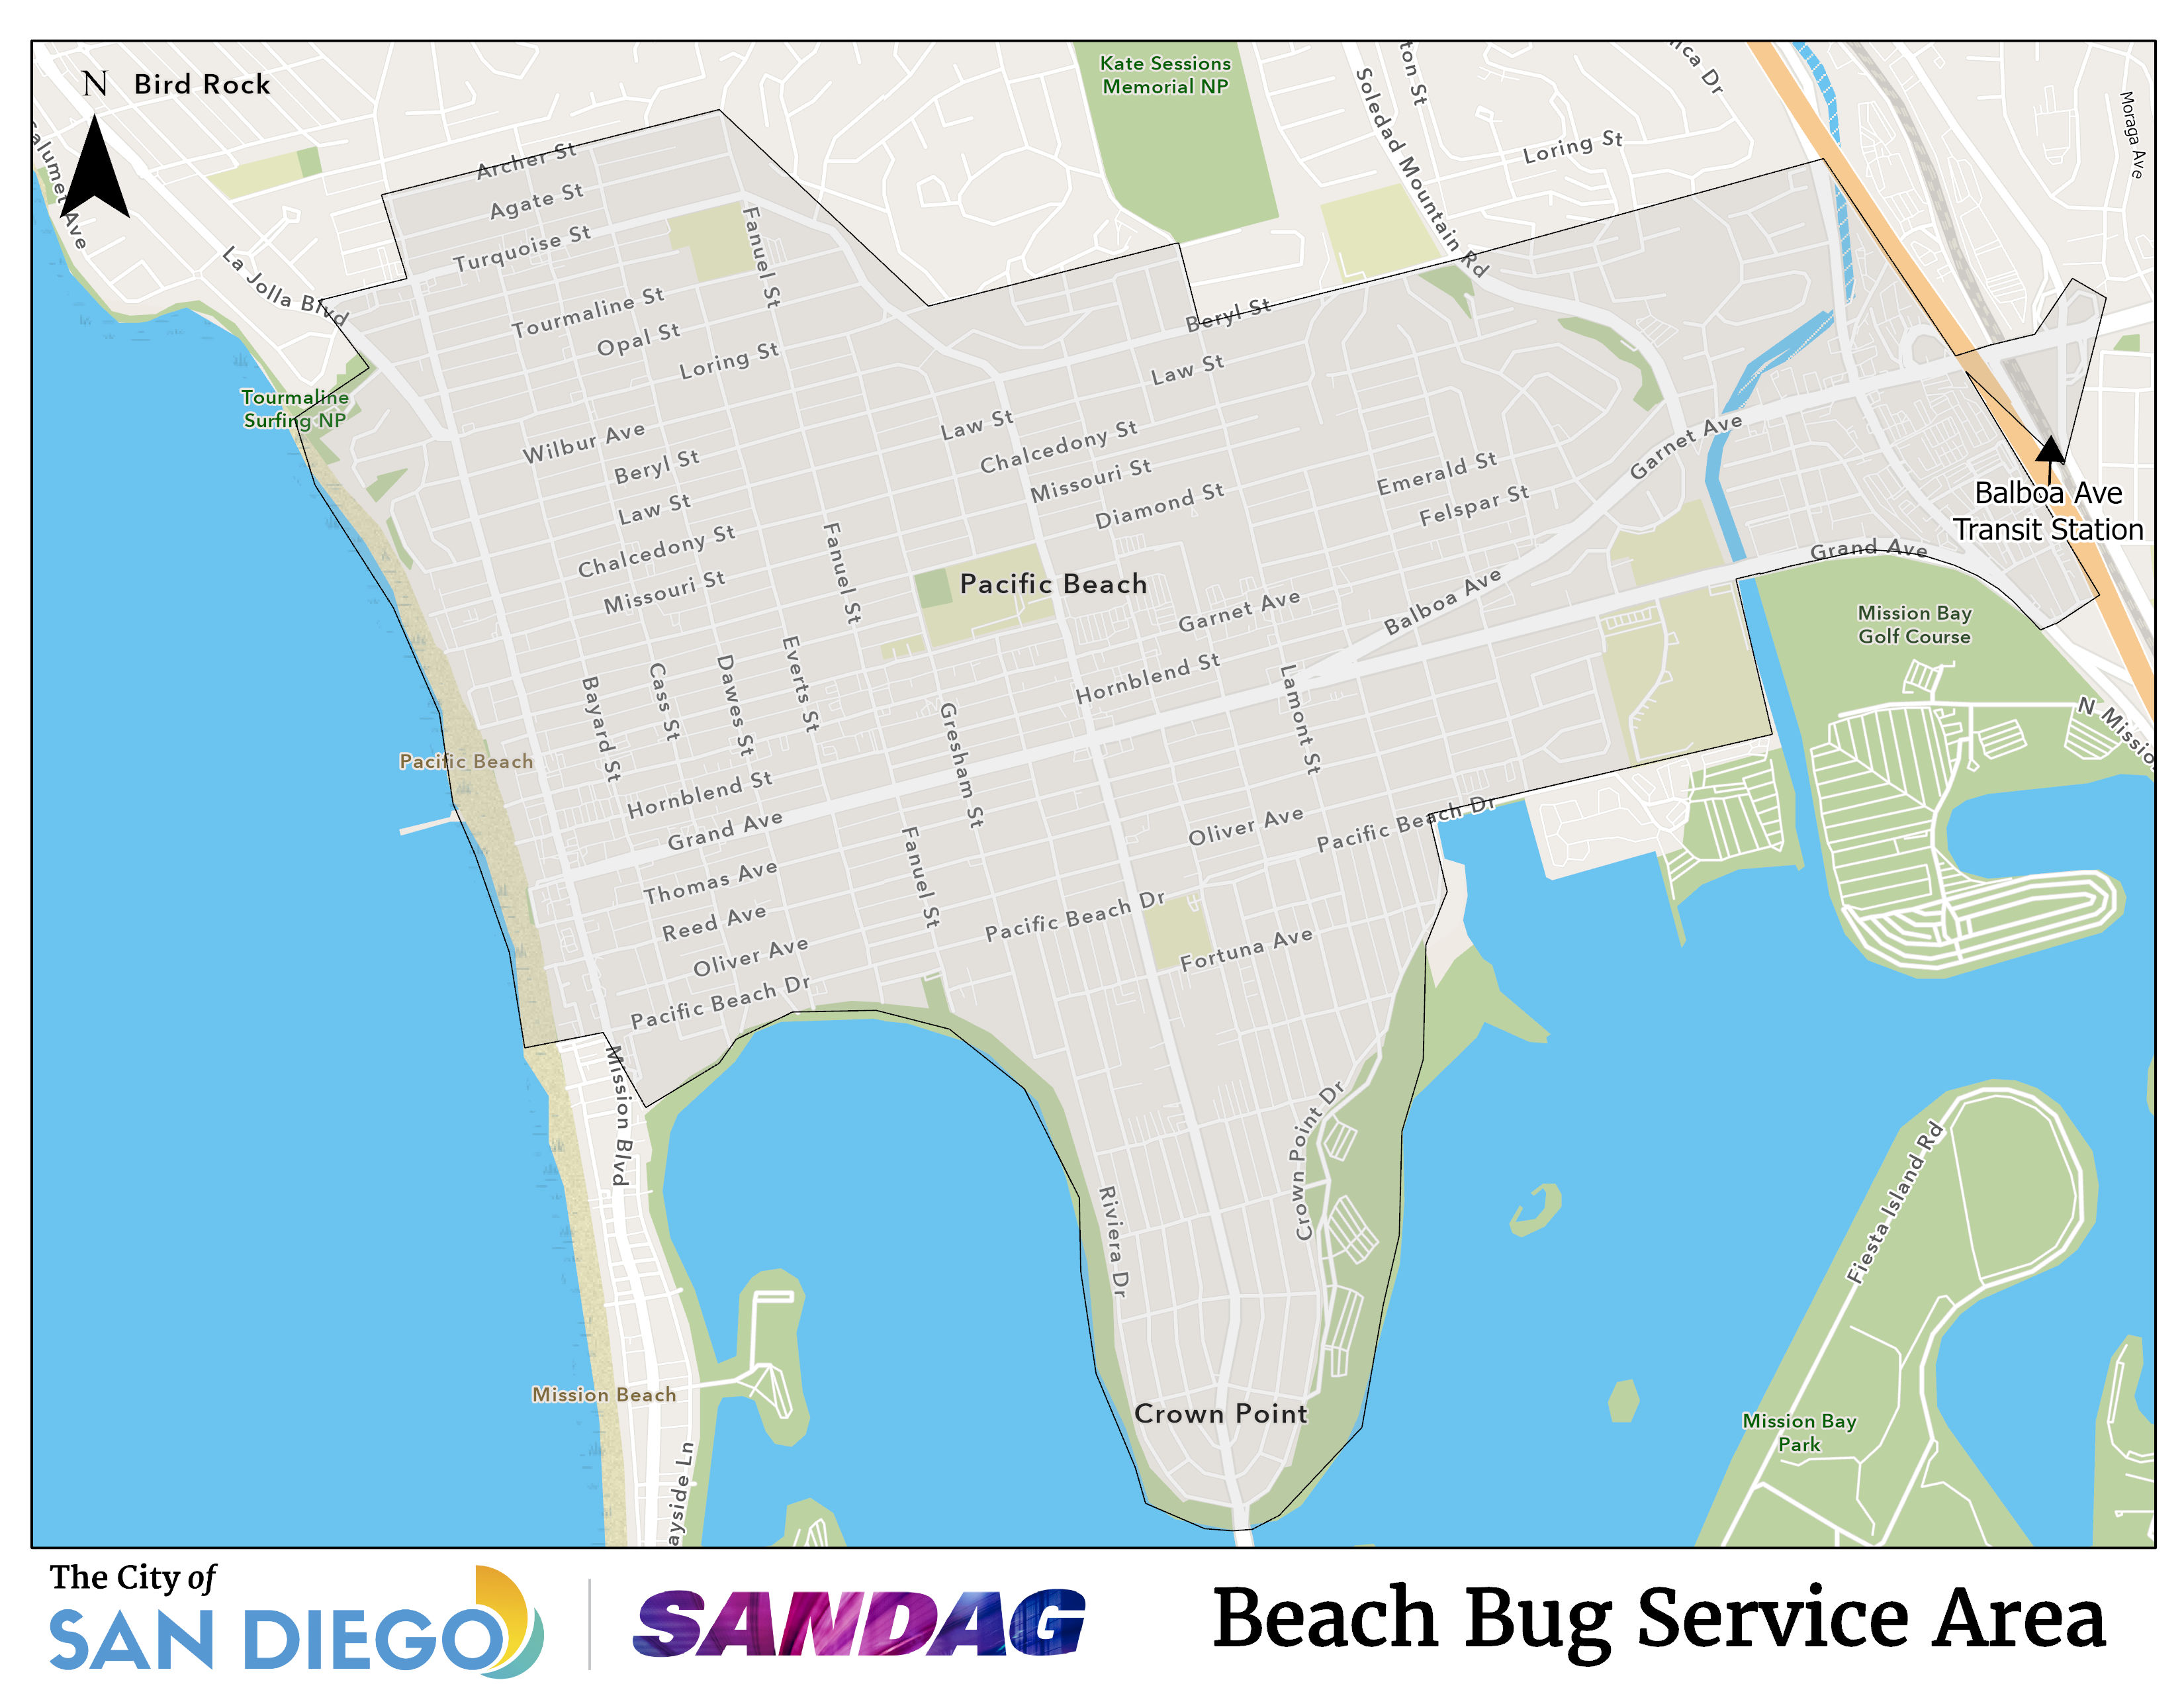 Overhead map of the Beach Bug service area, which covers the Pacific Beach neighborhood from the coast to Balboa Station